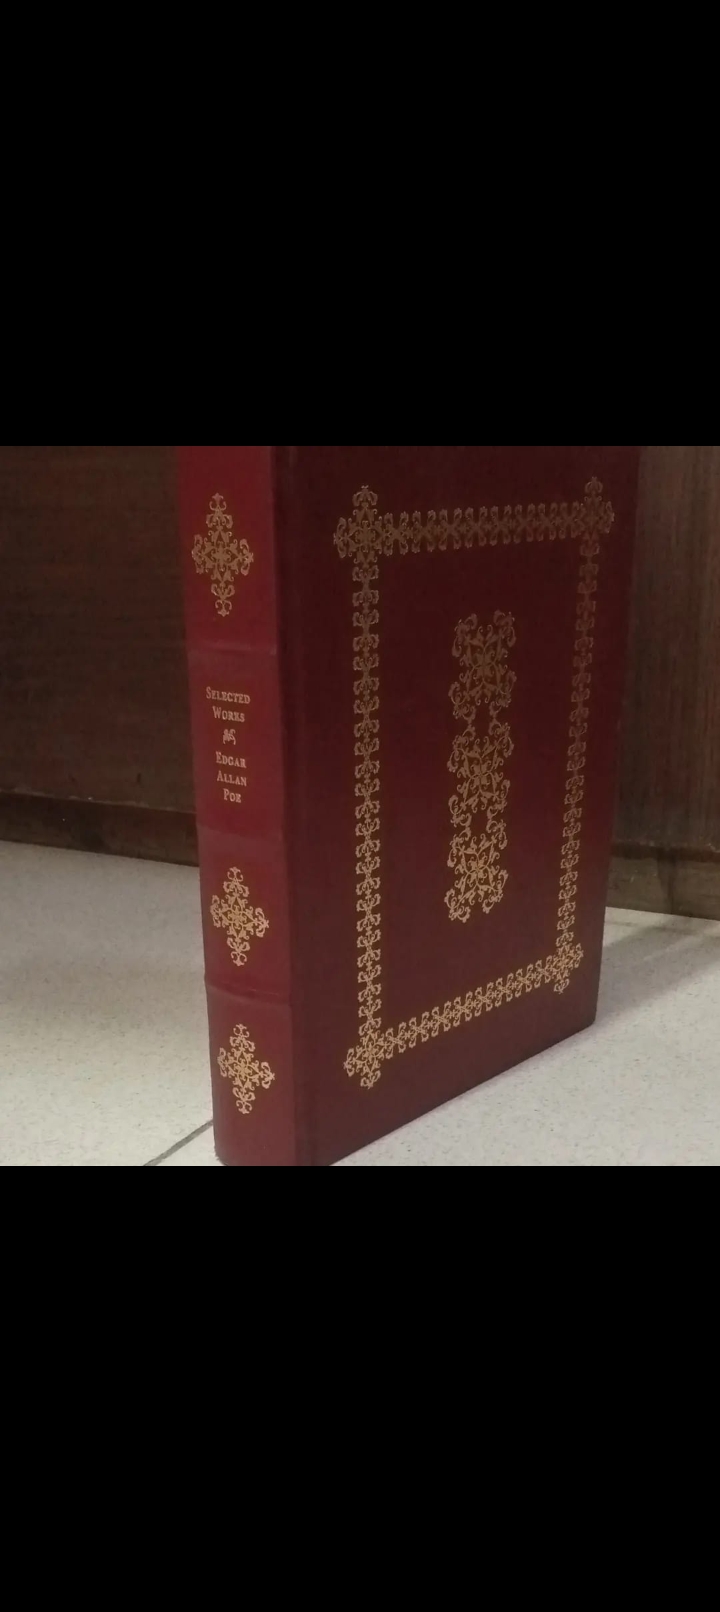 selected works by edgar allan poe from time warner libraries new york. leather bound golden edition